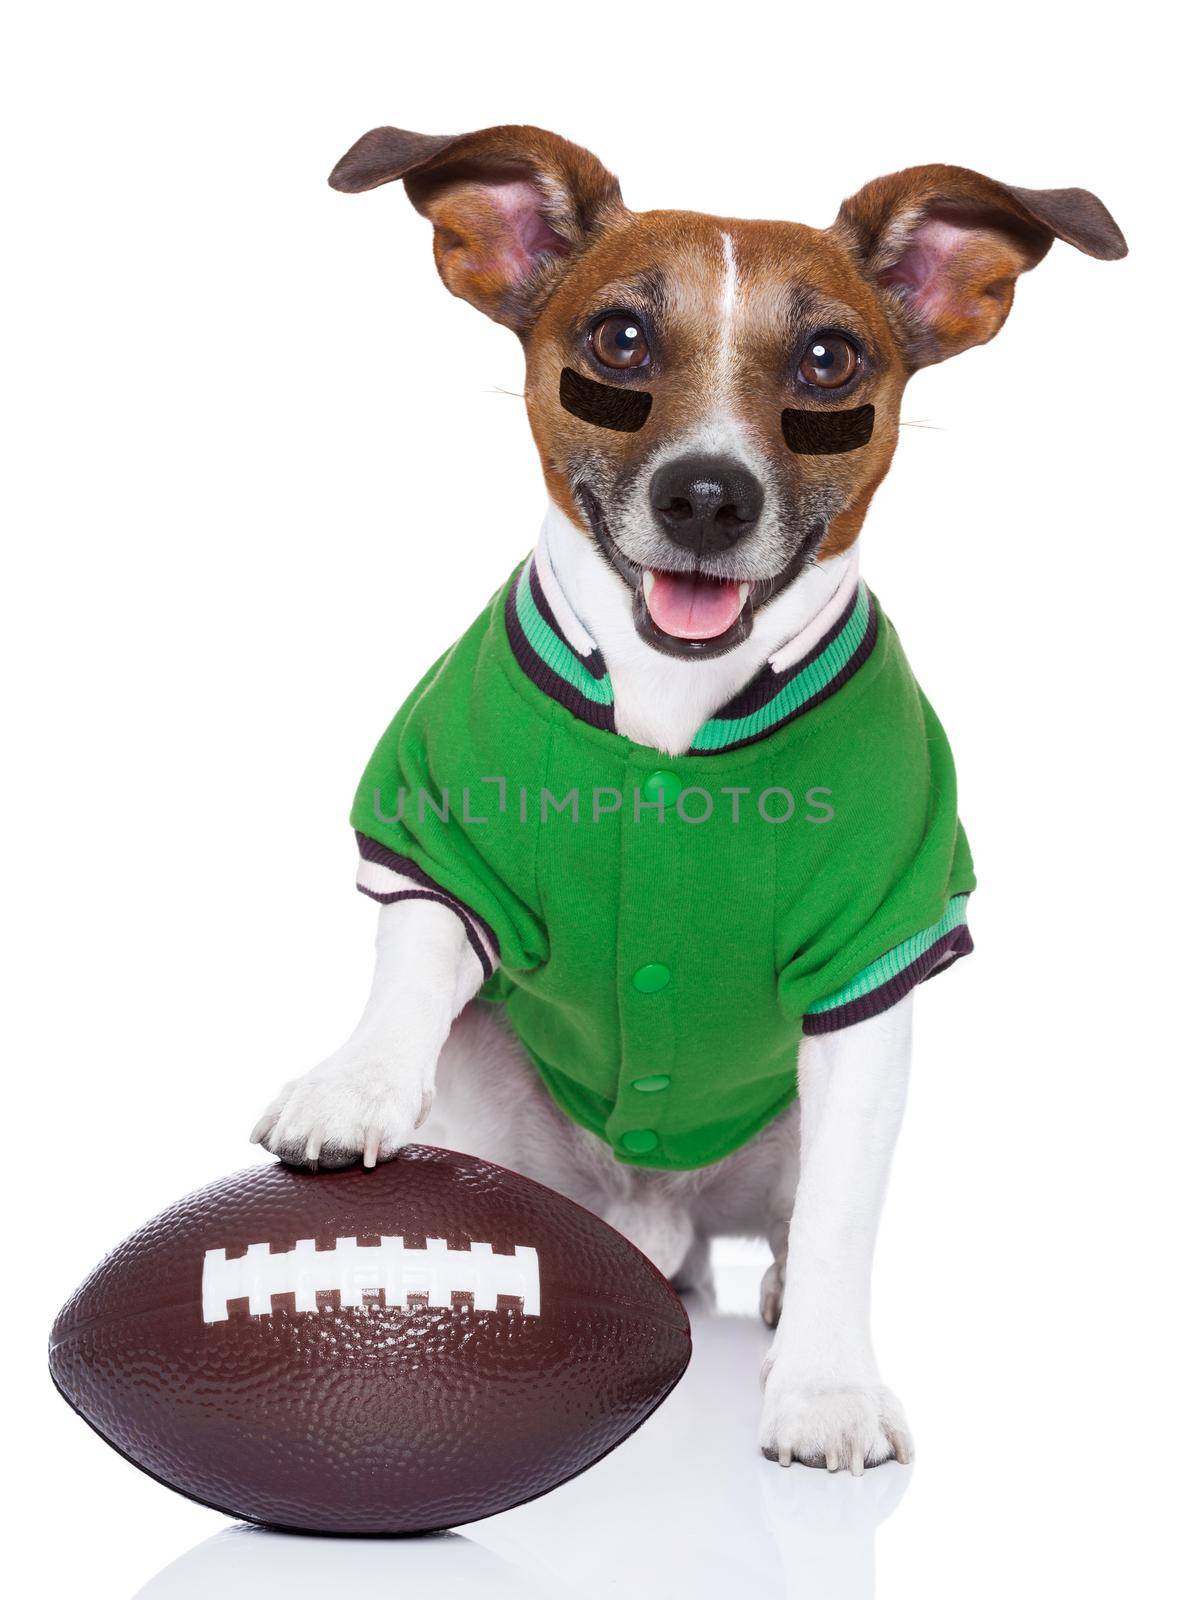 sporty rugby dog with a big sport ball